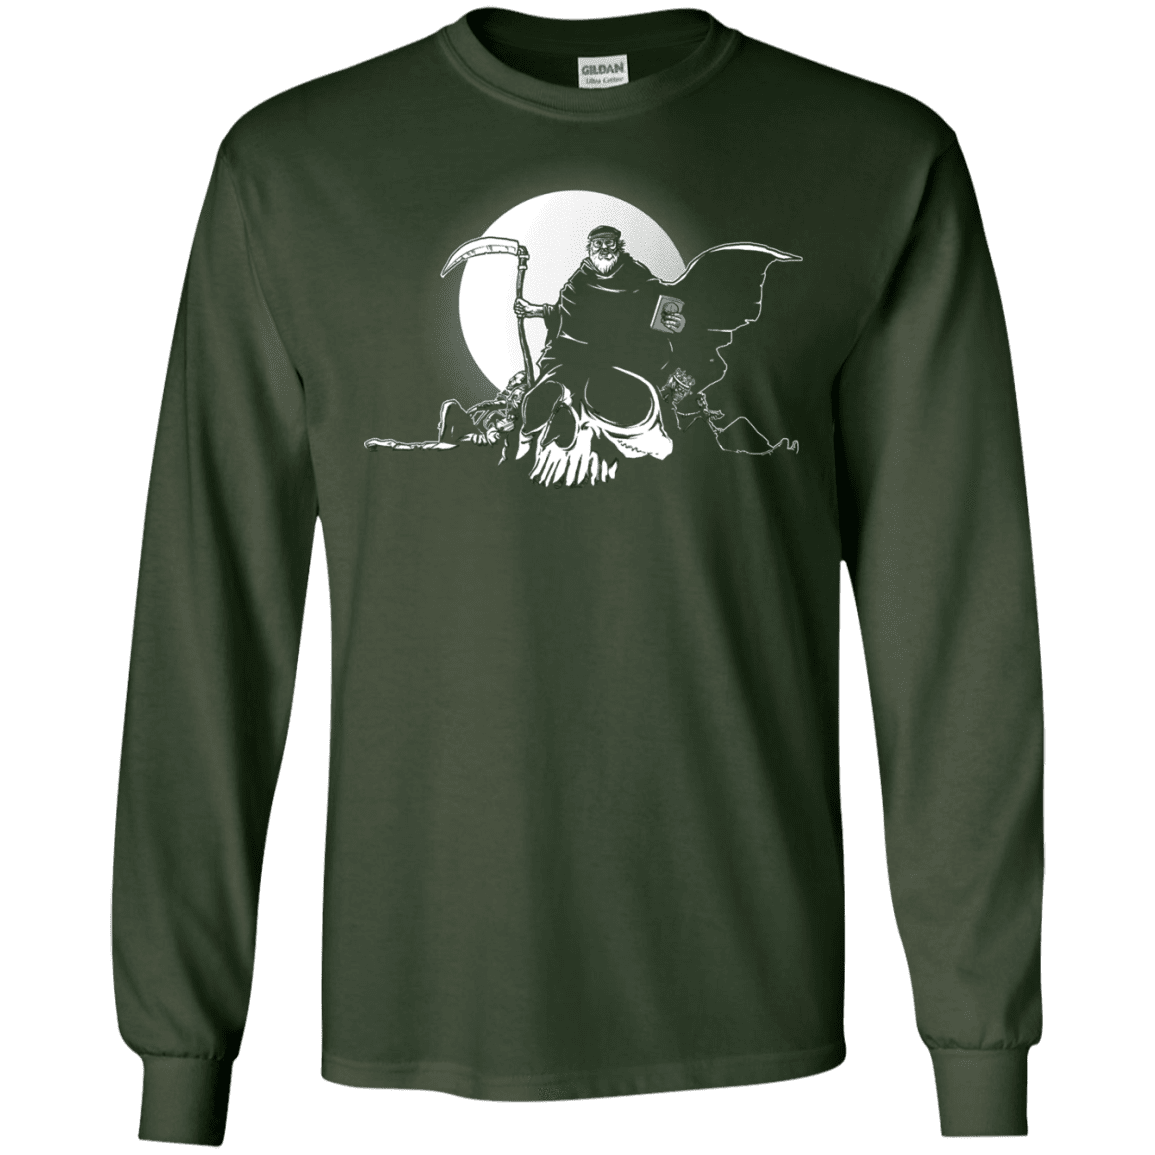 T-Shirts Forest Green / S Dead Characters Men's Long Sleeve T-Shirt